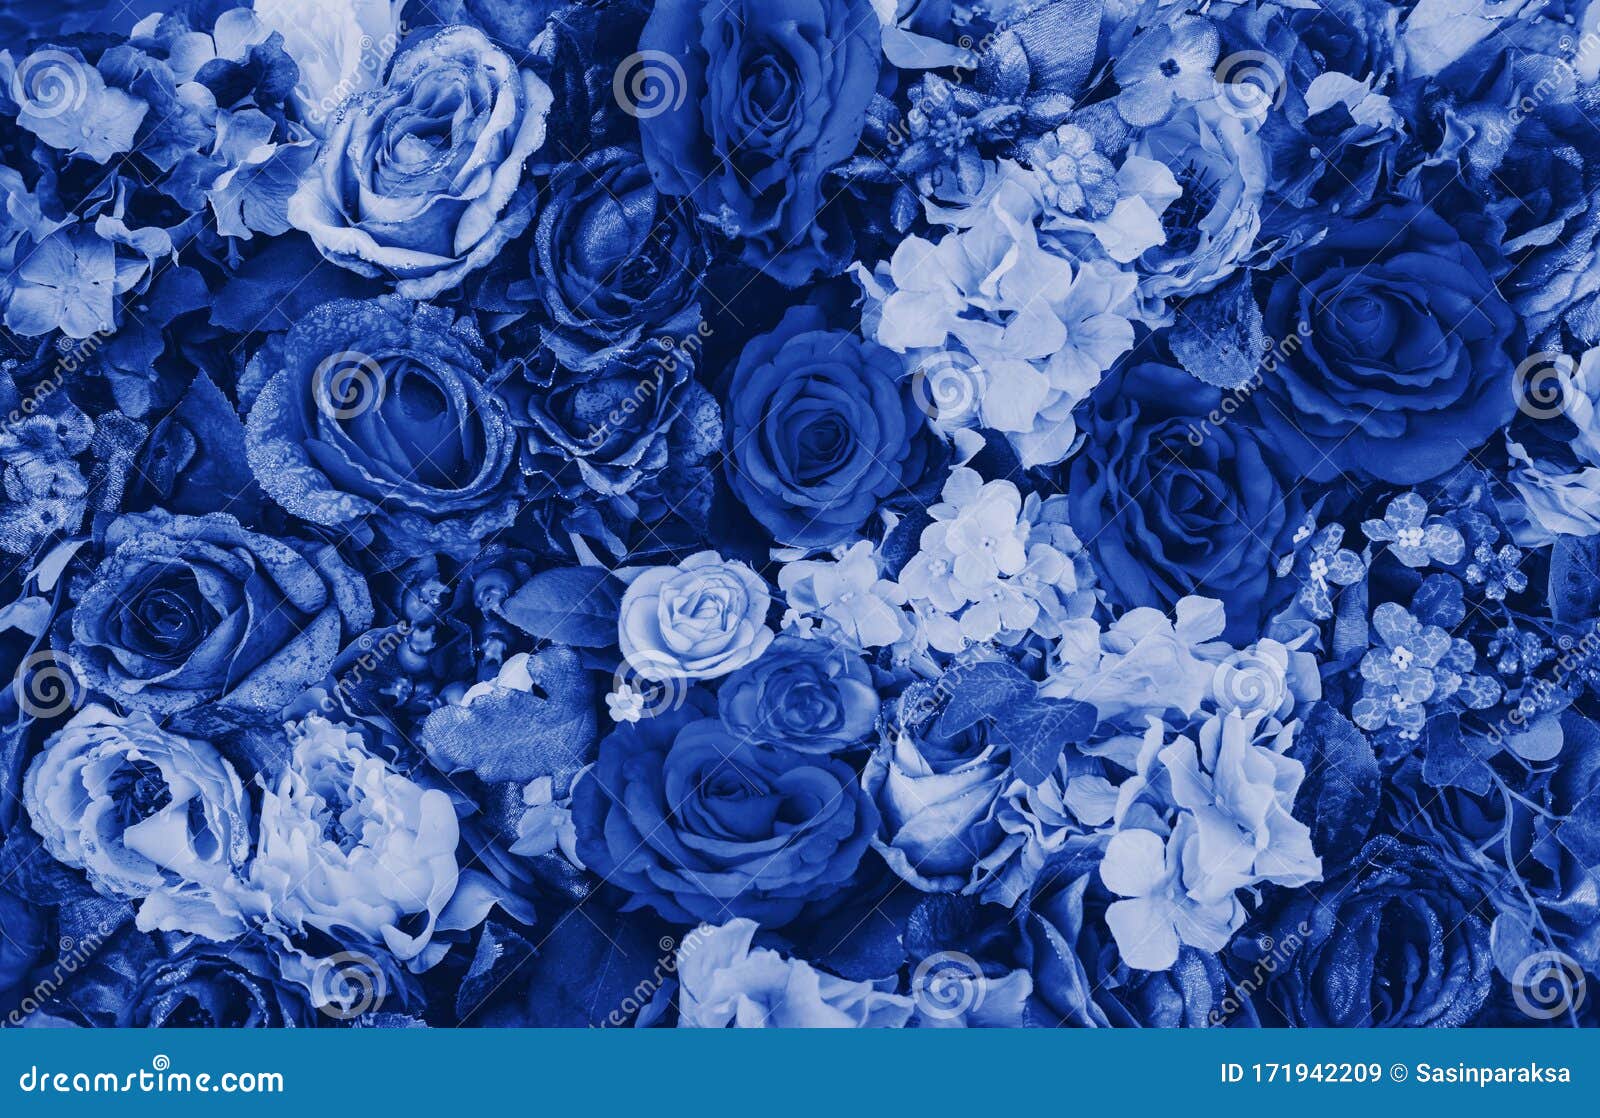 Details 300 blue flower background images - Abzlocal.mx